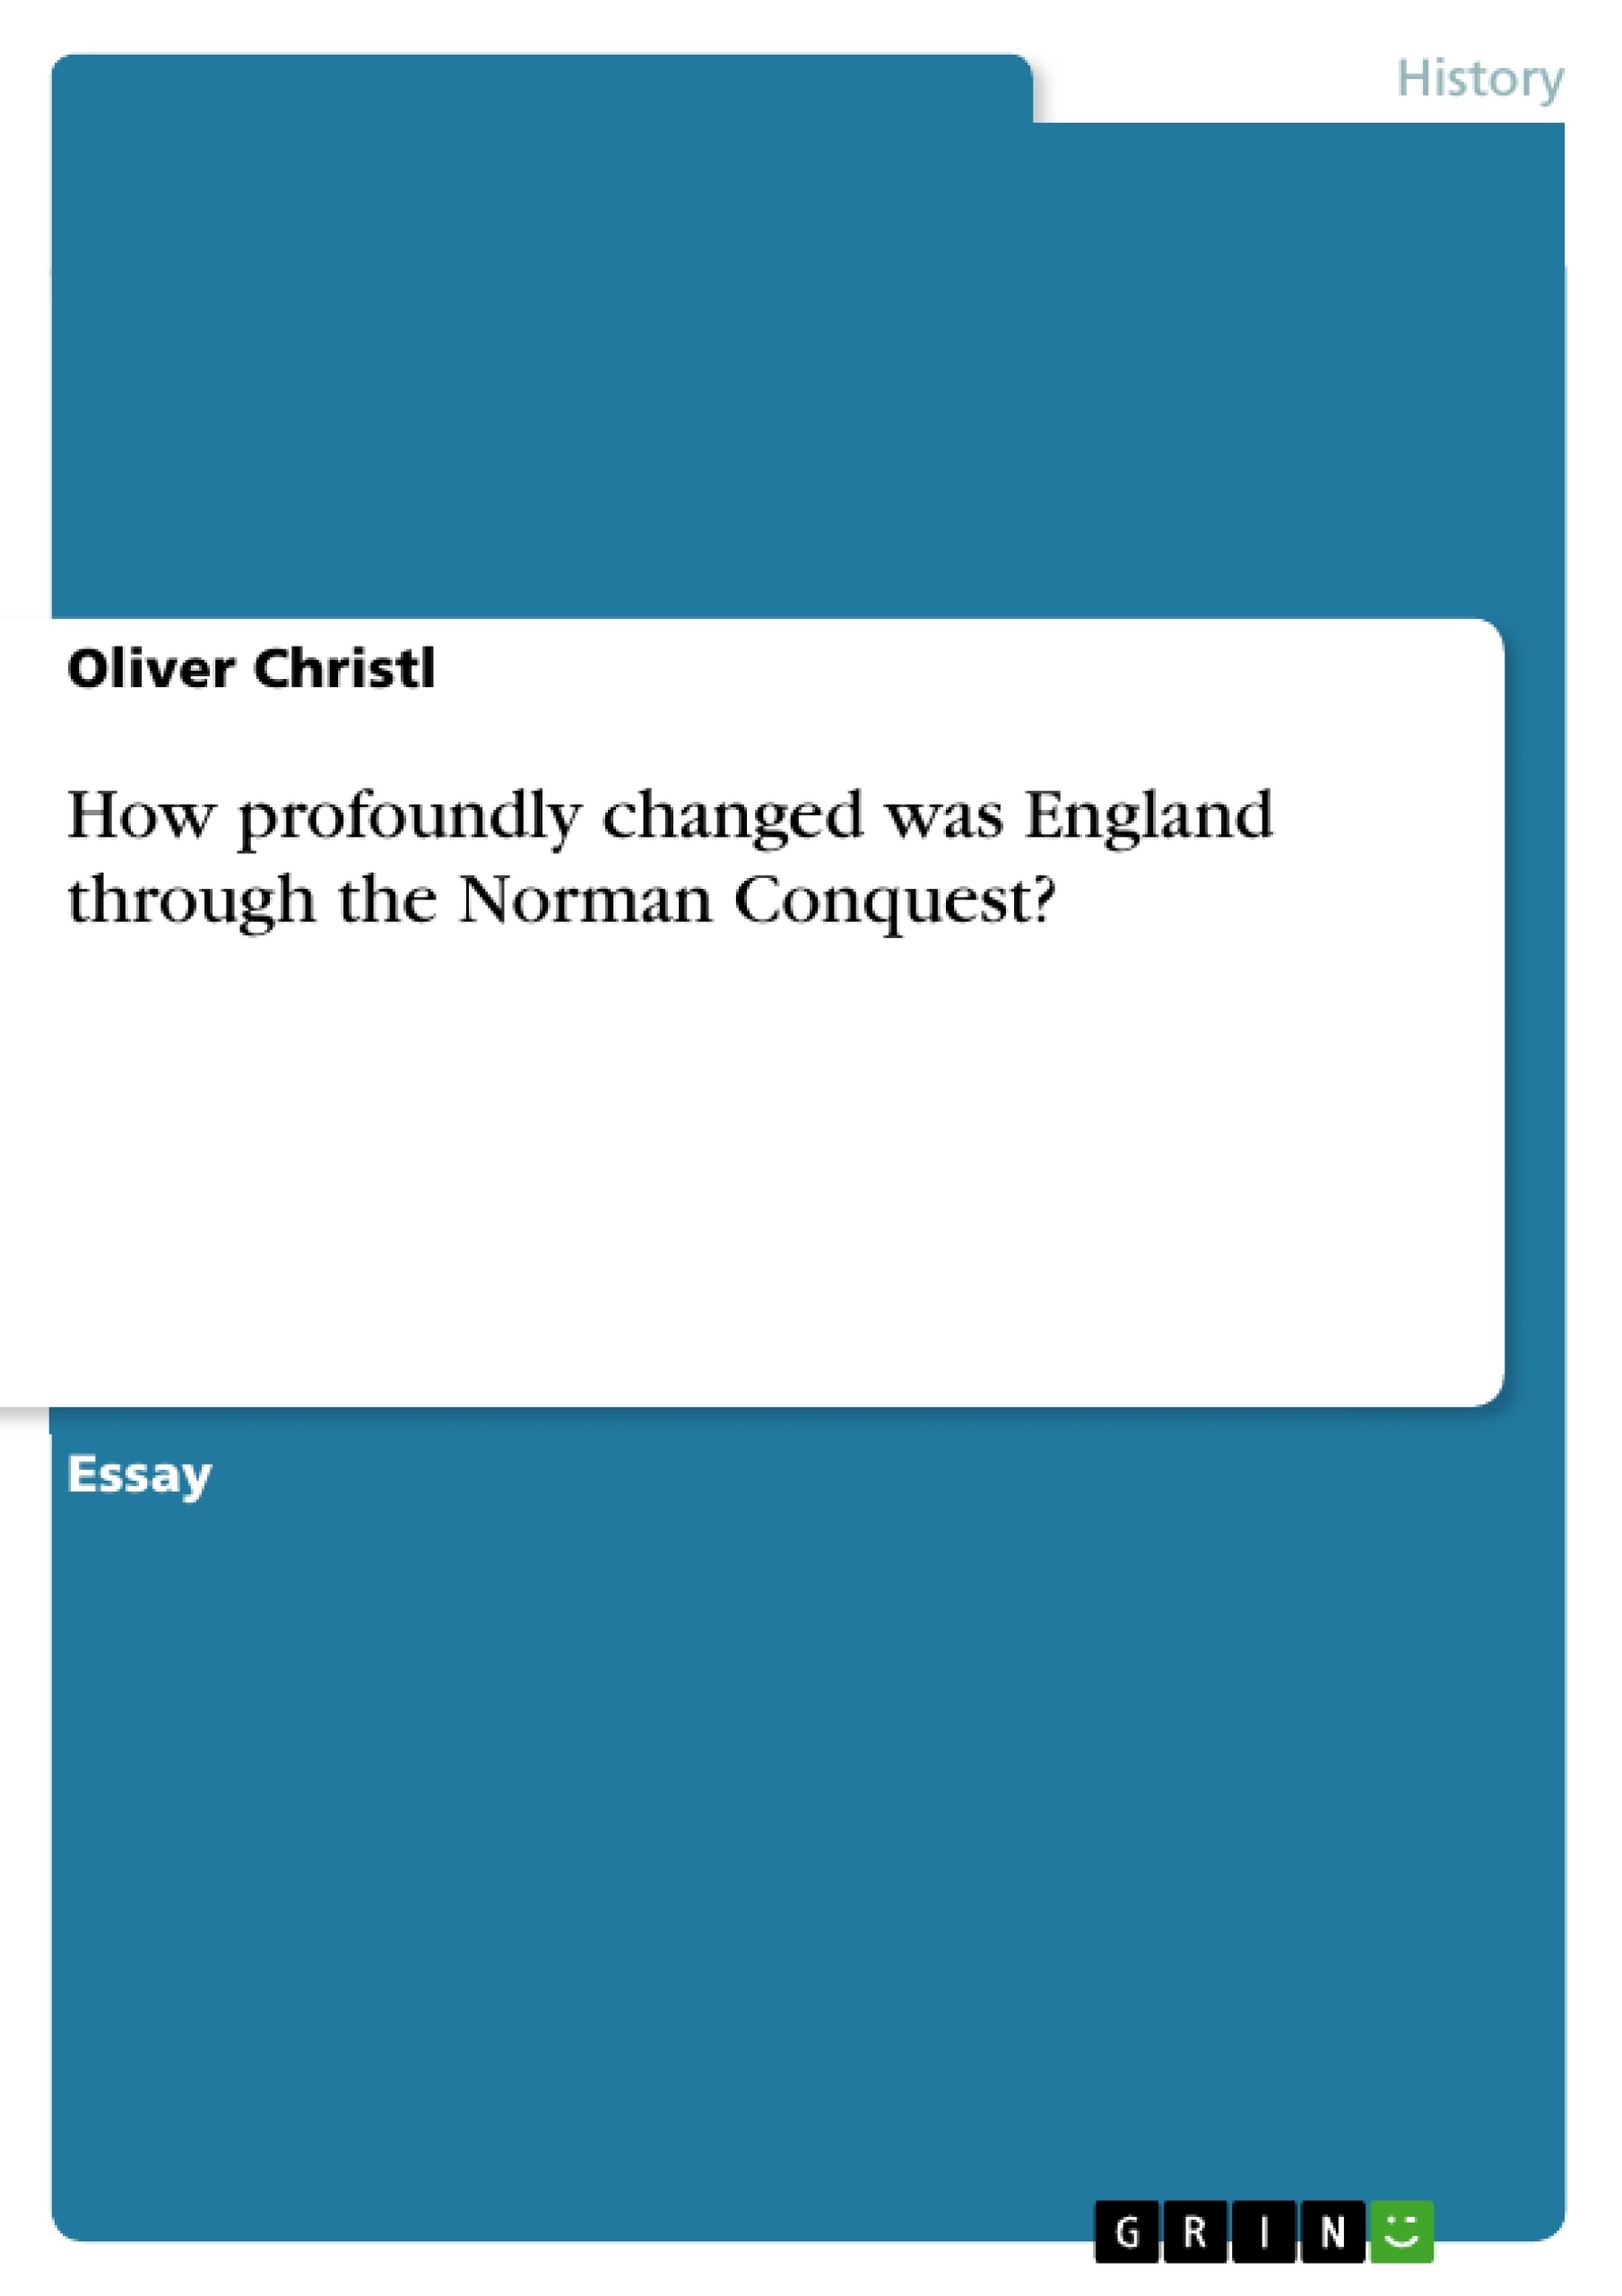 Title: How profoundly changed was England through the Norman Conquest?